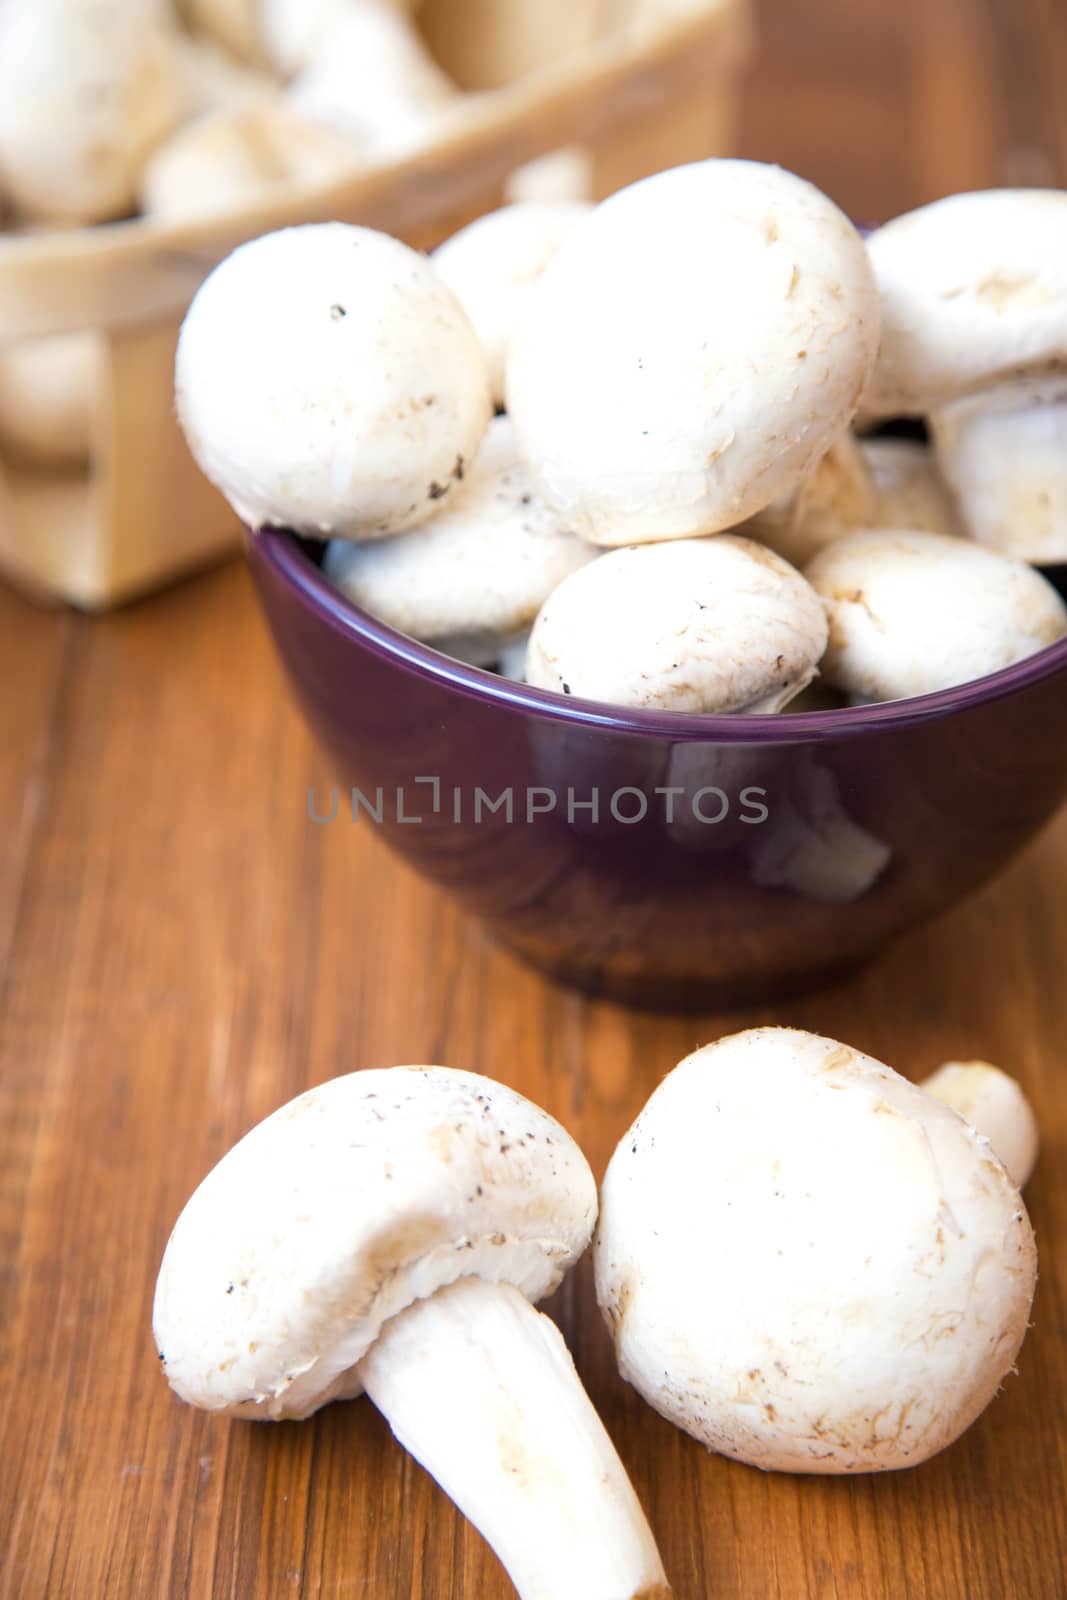 many raw fresh mushrooms in a bowl on a wooden background